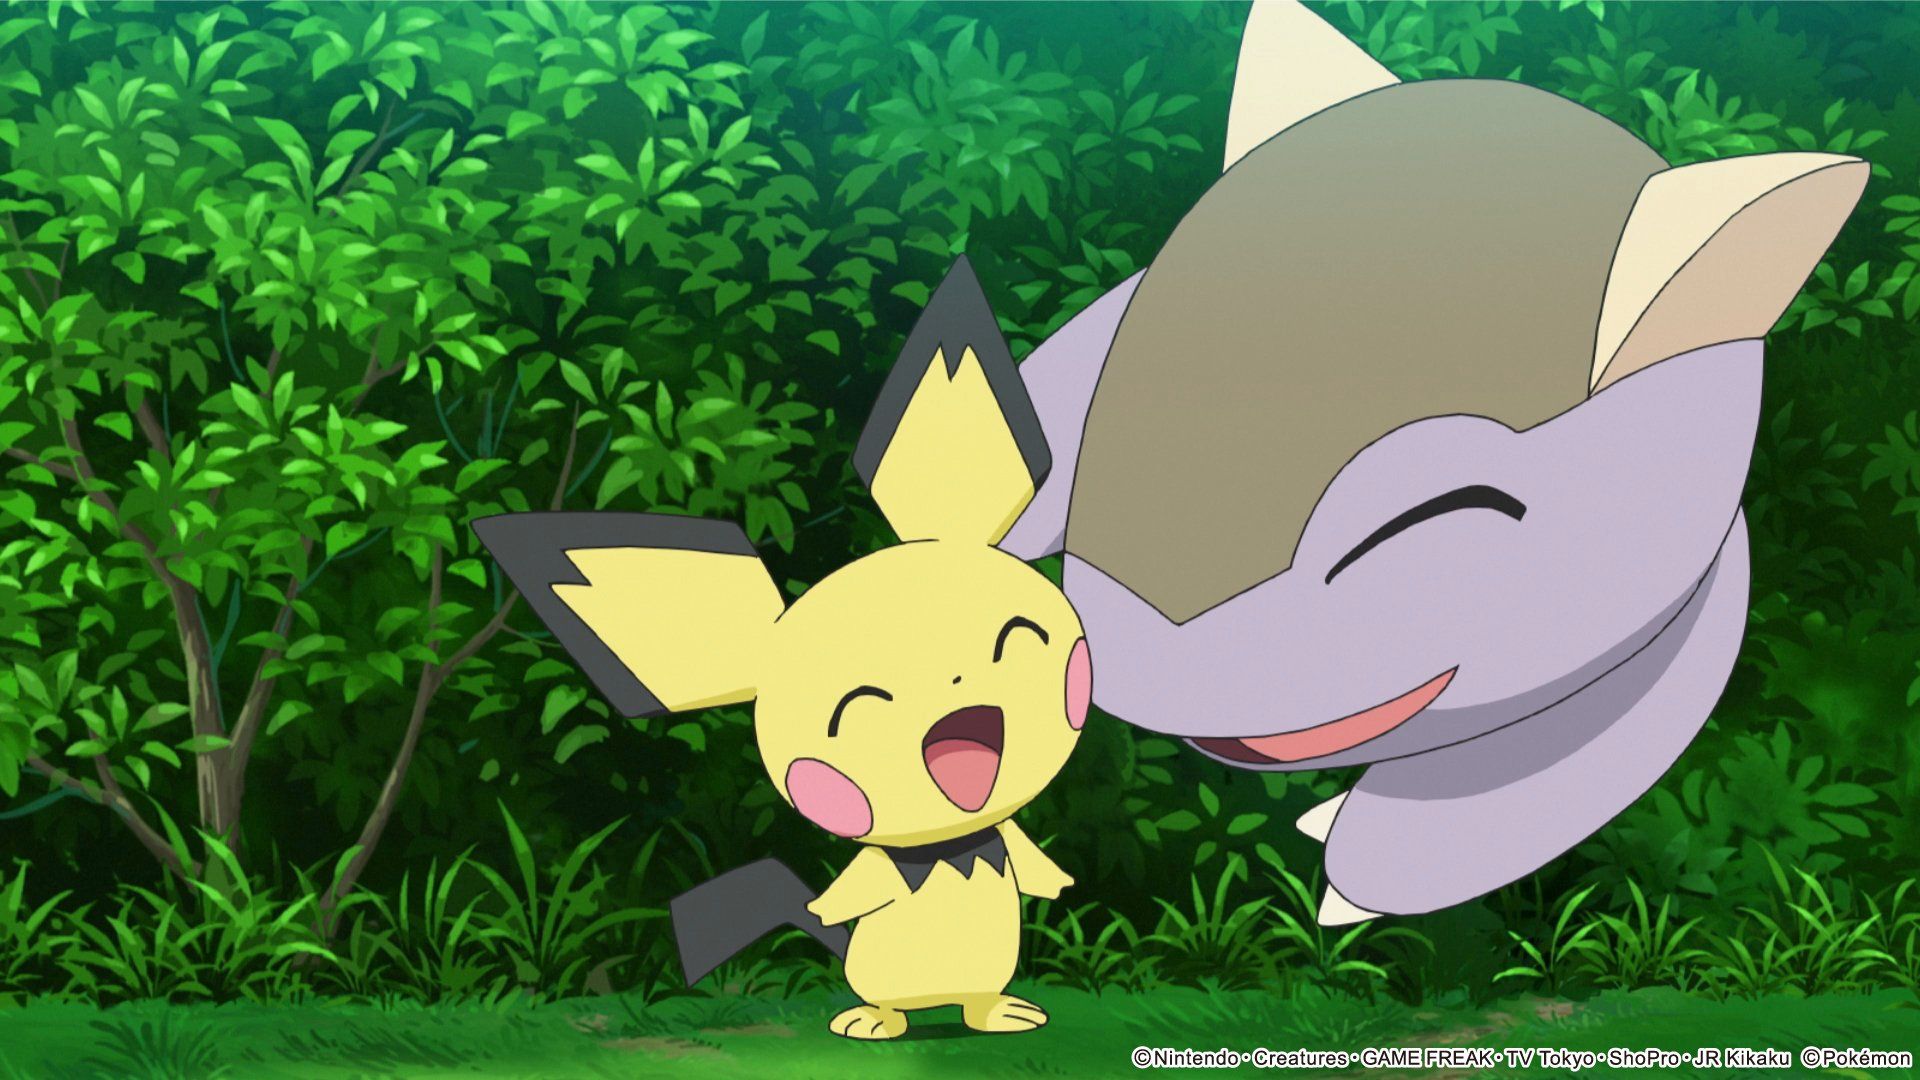 New Pokemon Anime Reveals First Images of an Episode